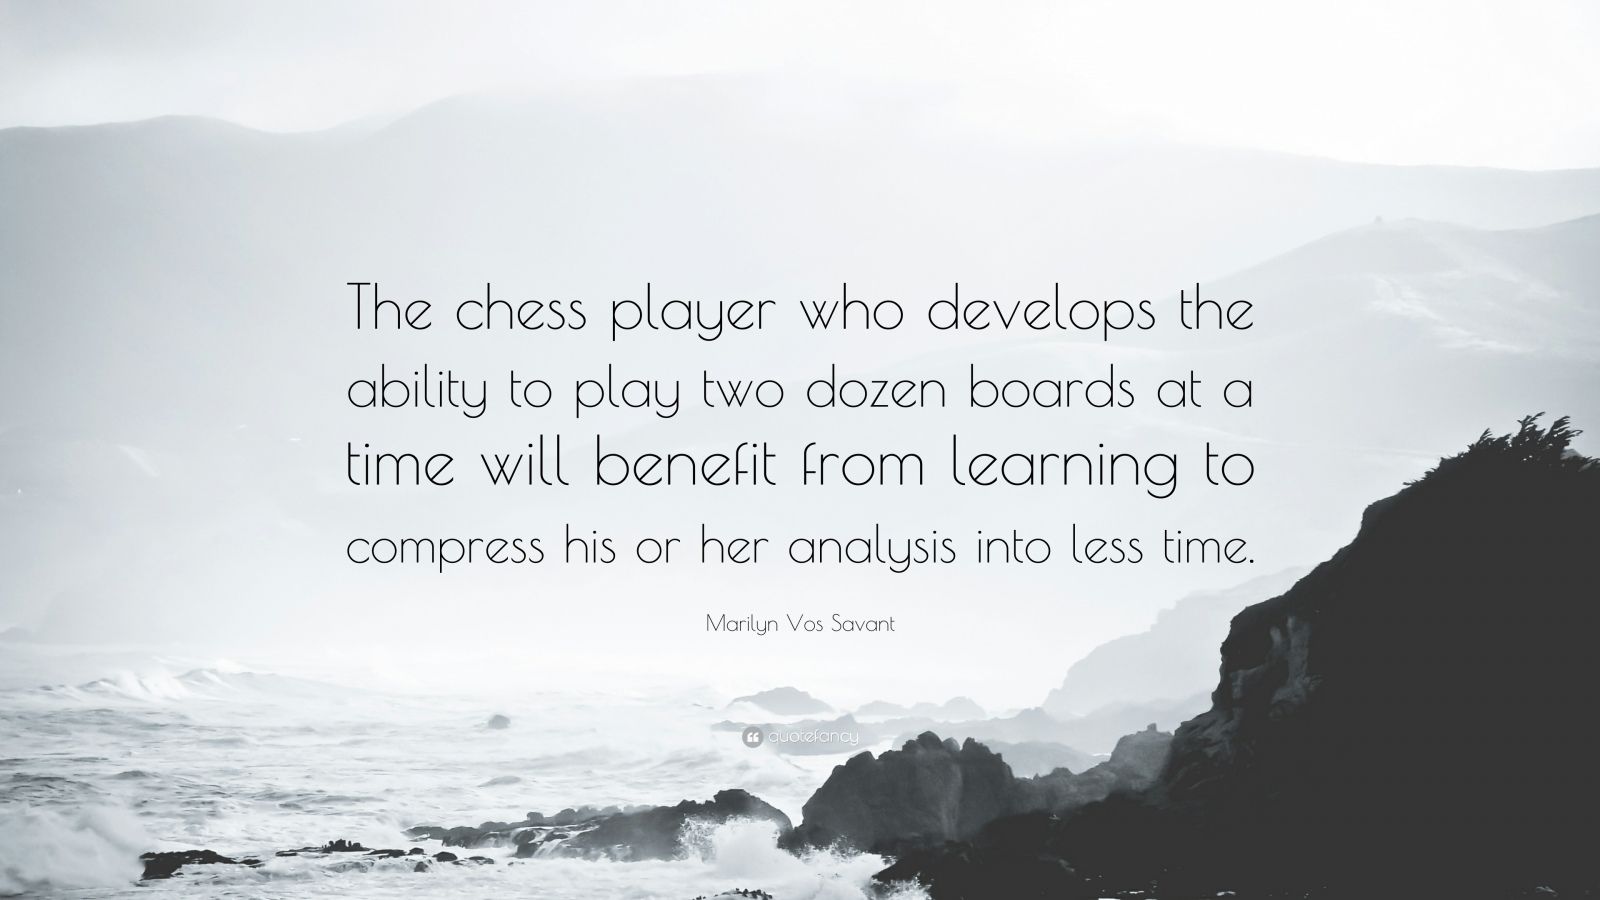 Marilyn vos Savant - The chess player who develops the